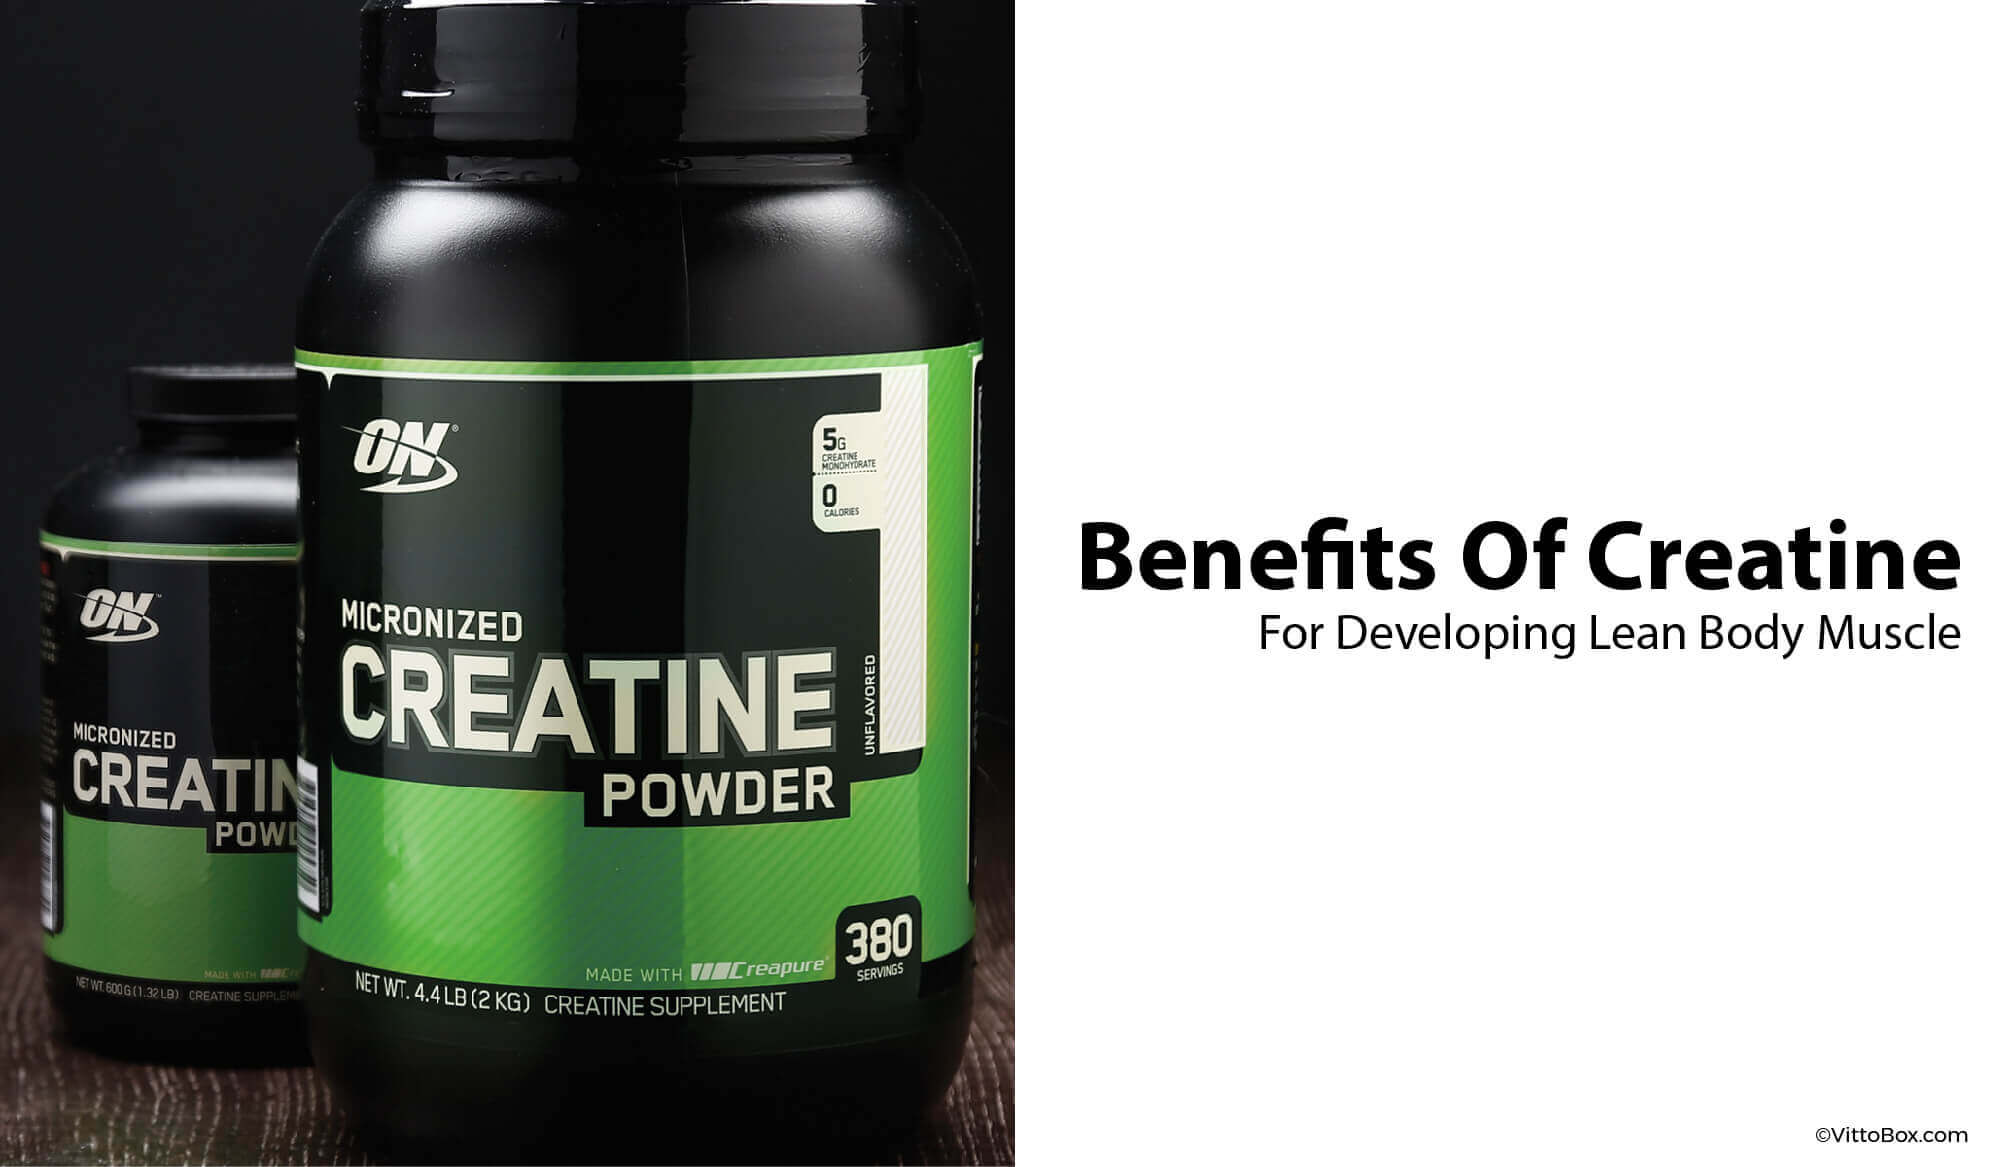 The Benefits Of Creatine For Developing Lean Mass